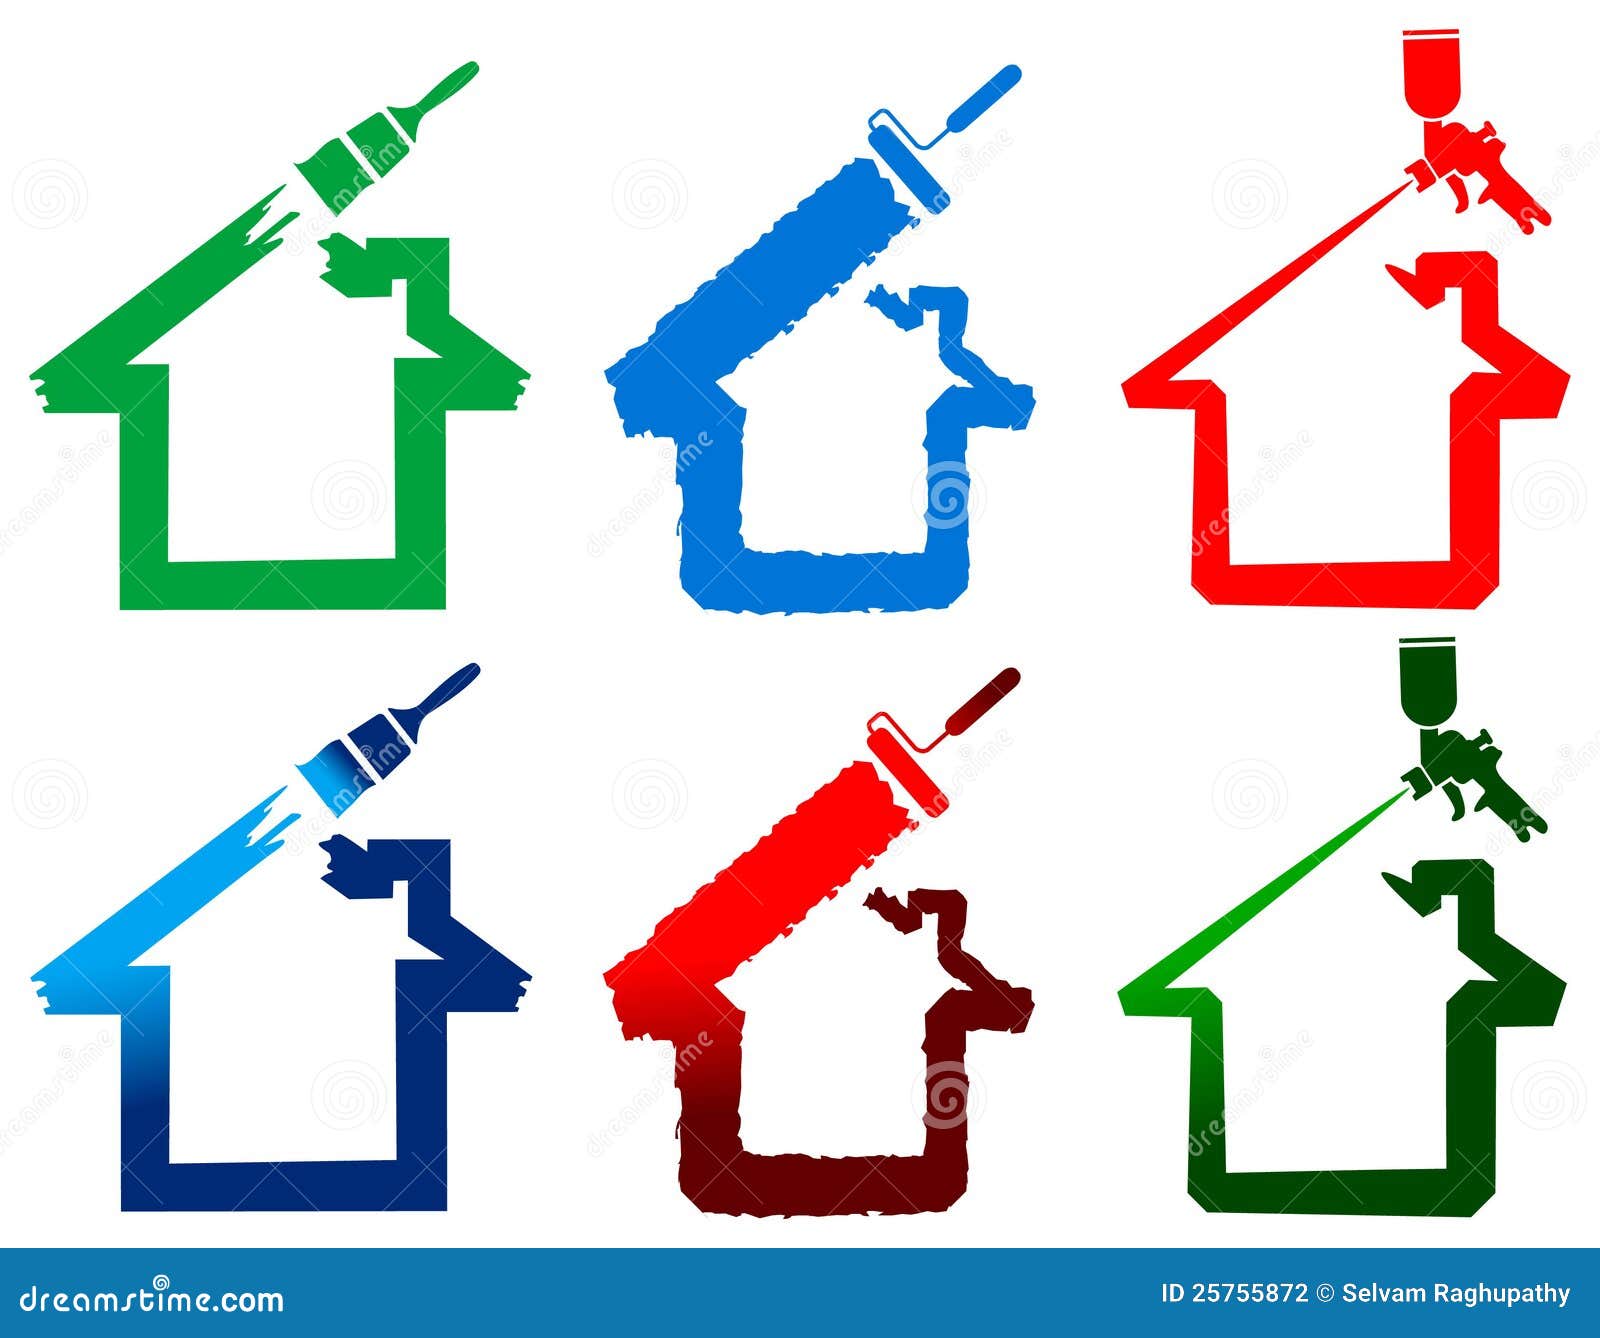 man painting house clipart - photo #38